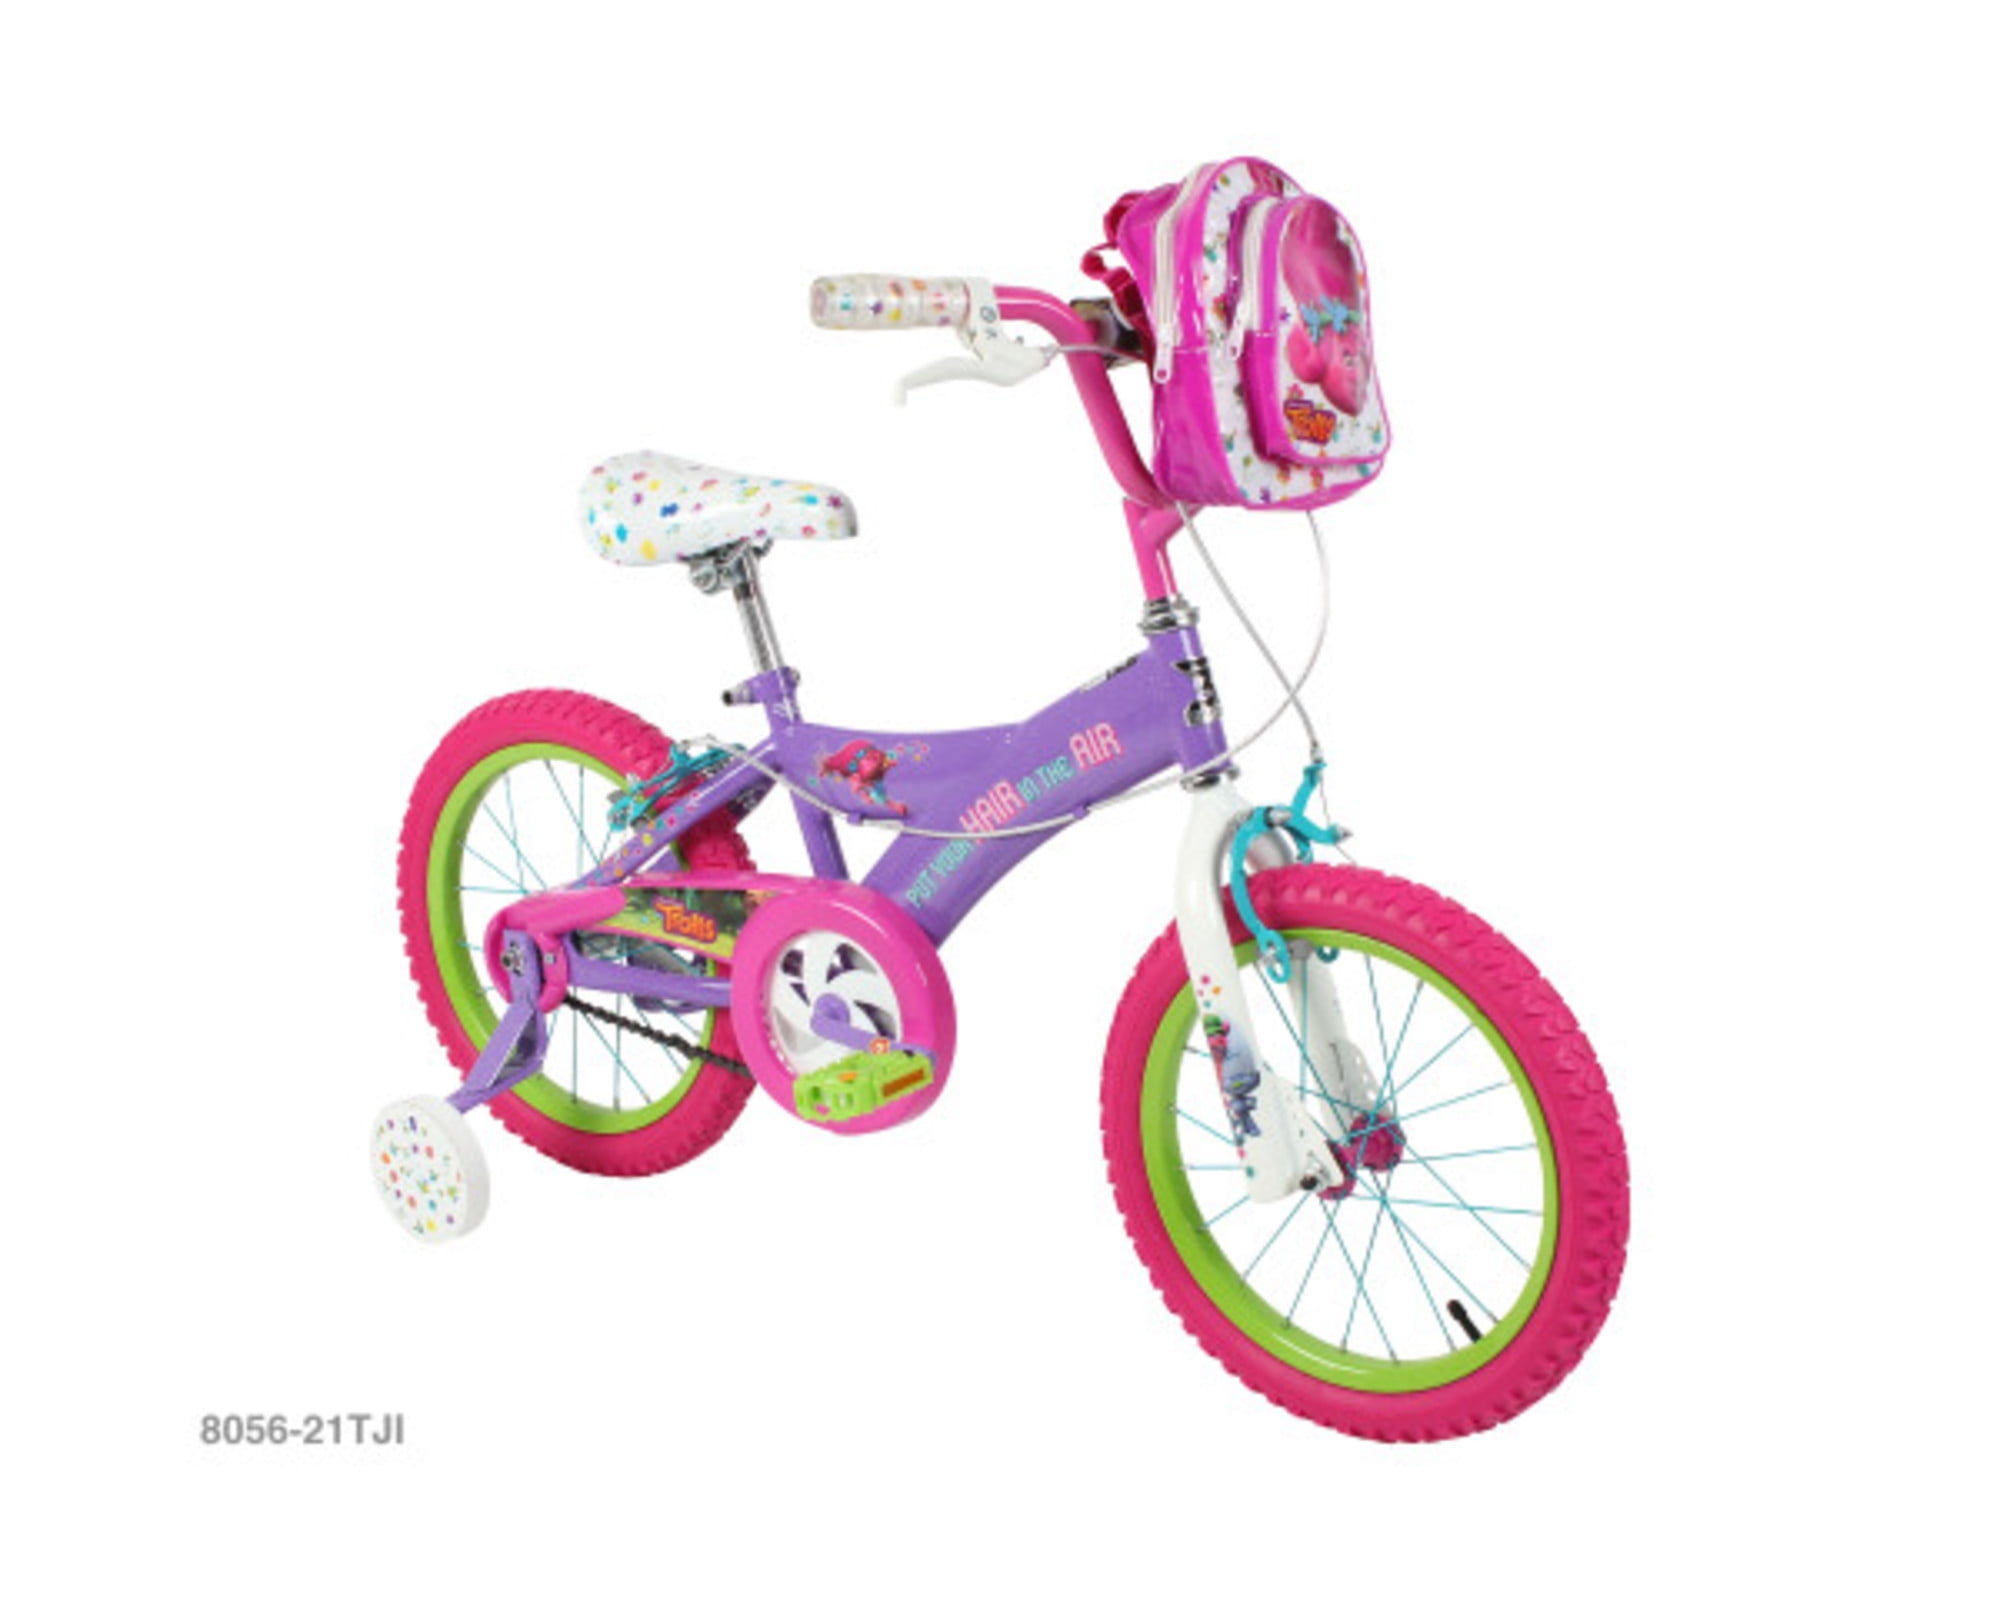 but With Tiny Flaw for sale online Hello Kitty Cycle Bike Scooter Safety Helmet Pink 